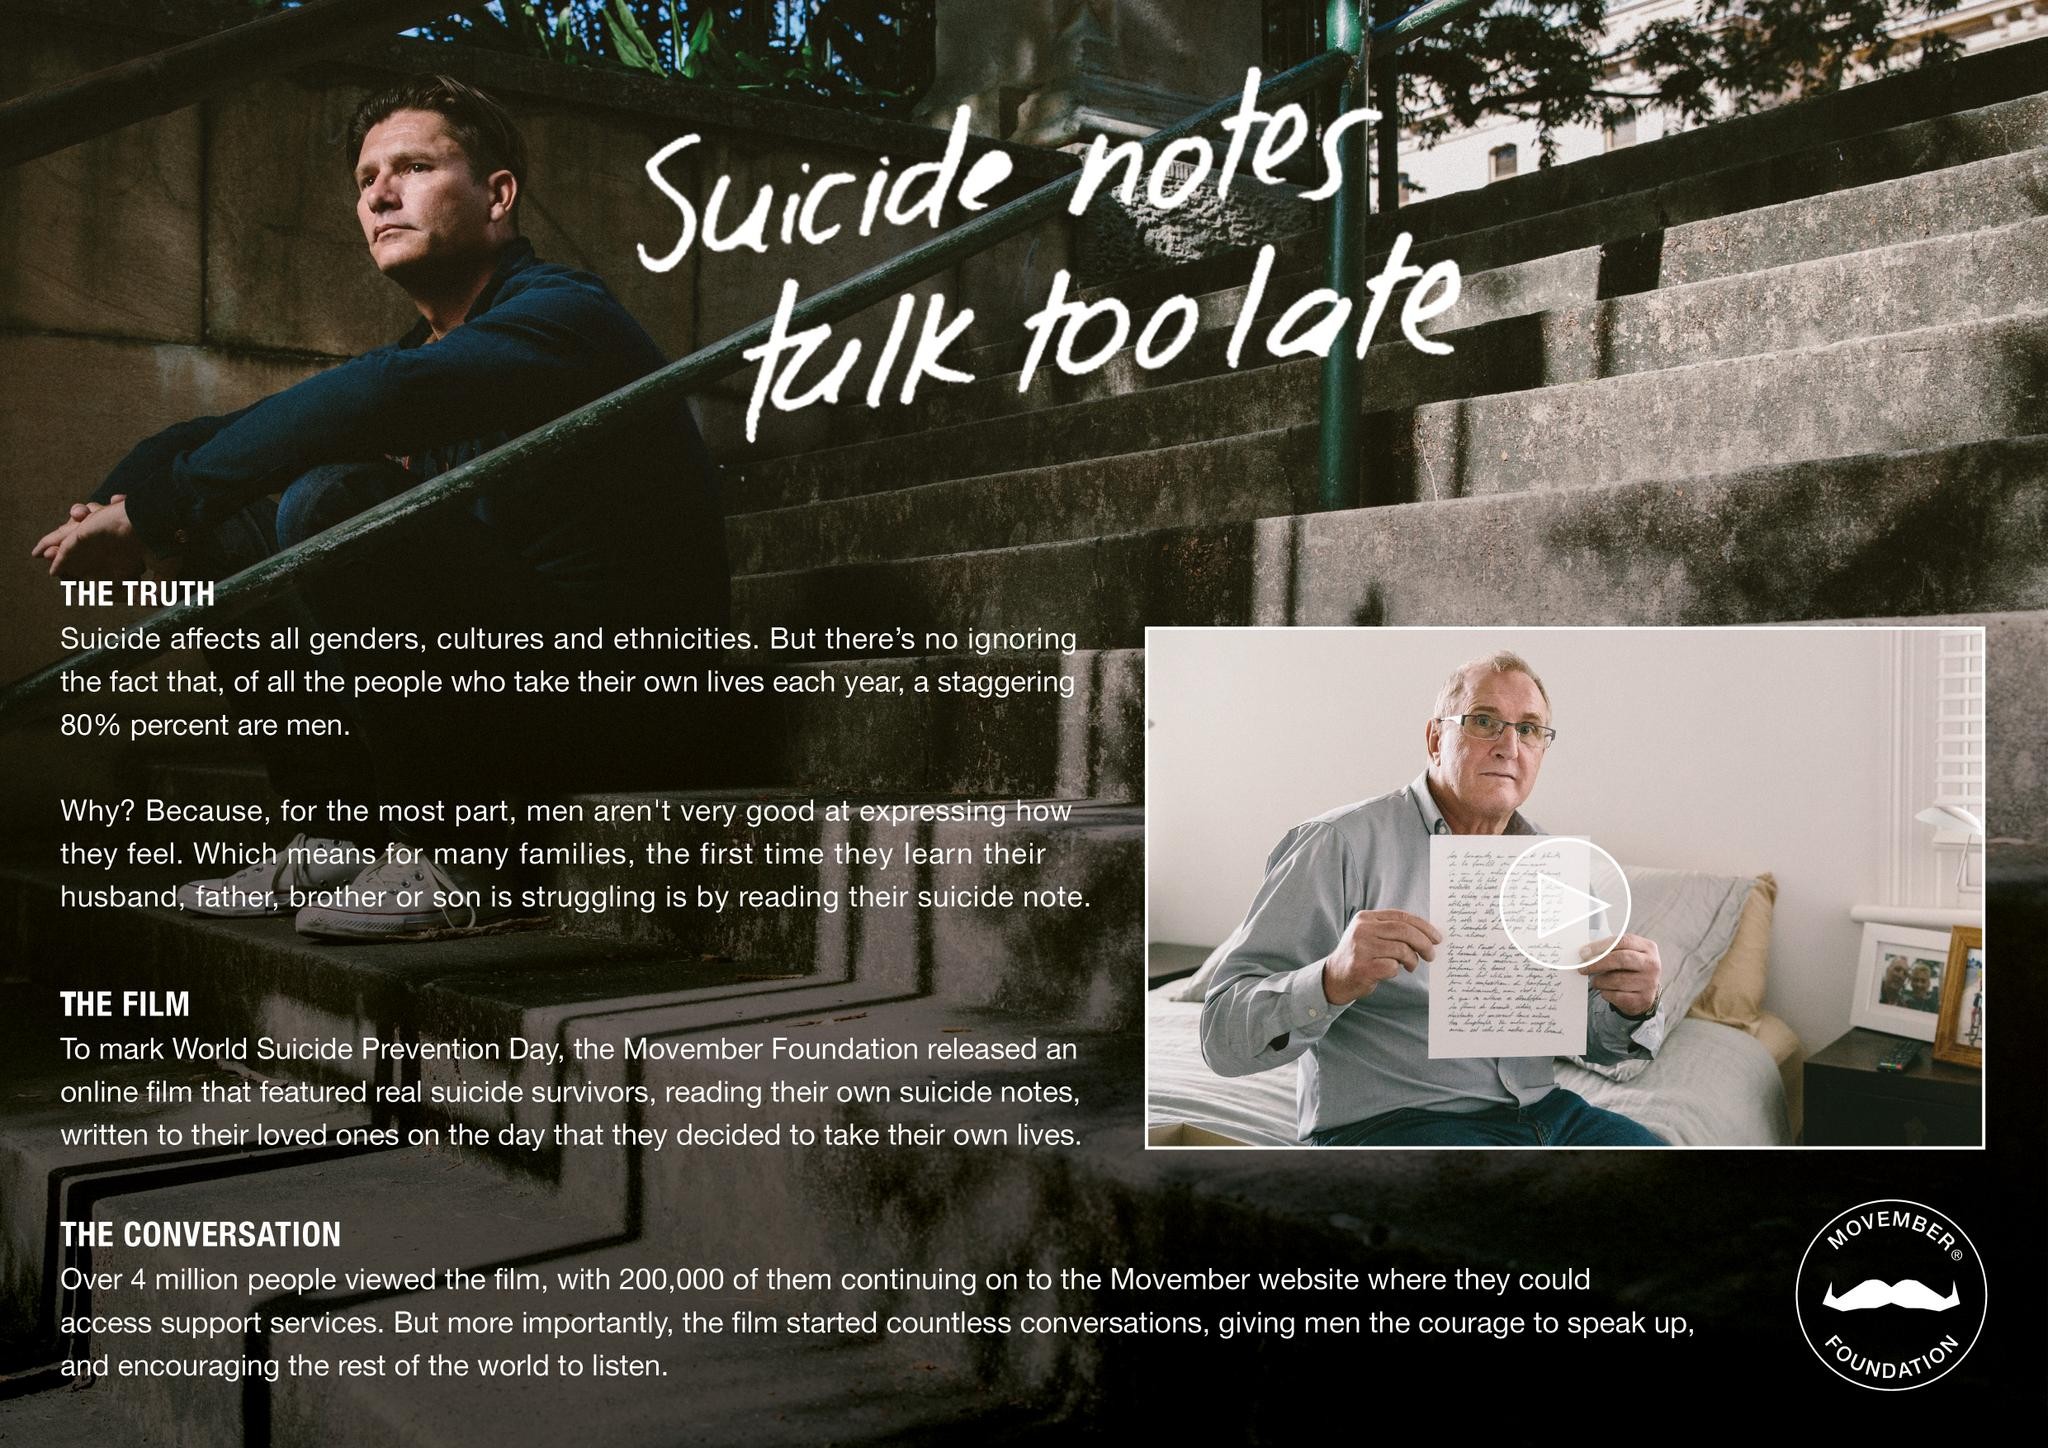 Suicide Notes Talk Too Late